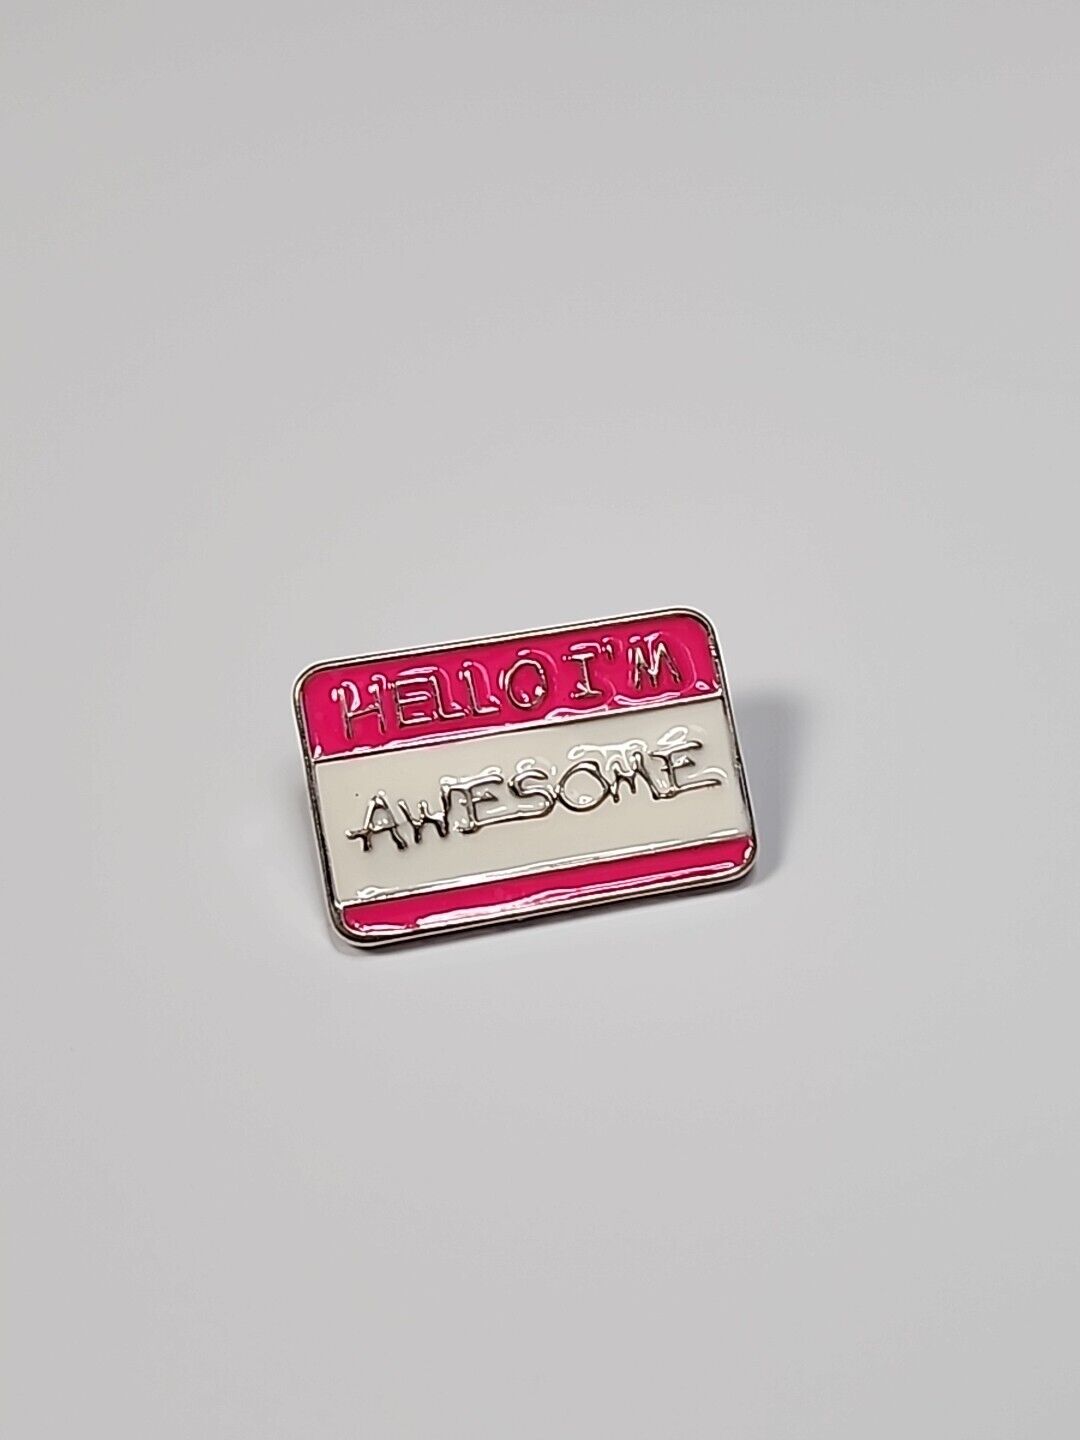 Hello I\'m Awesome Name Tag Lapel Pin Humorous Small Size Pink & White Colors